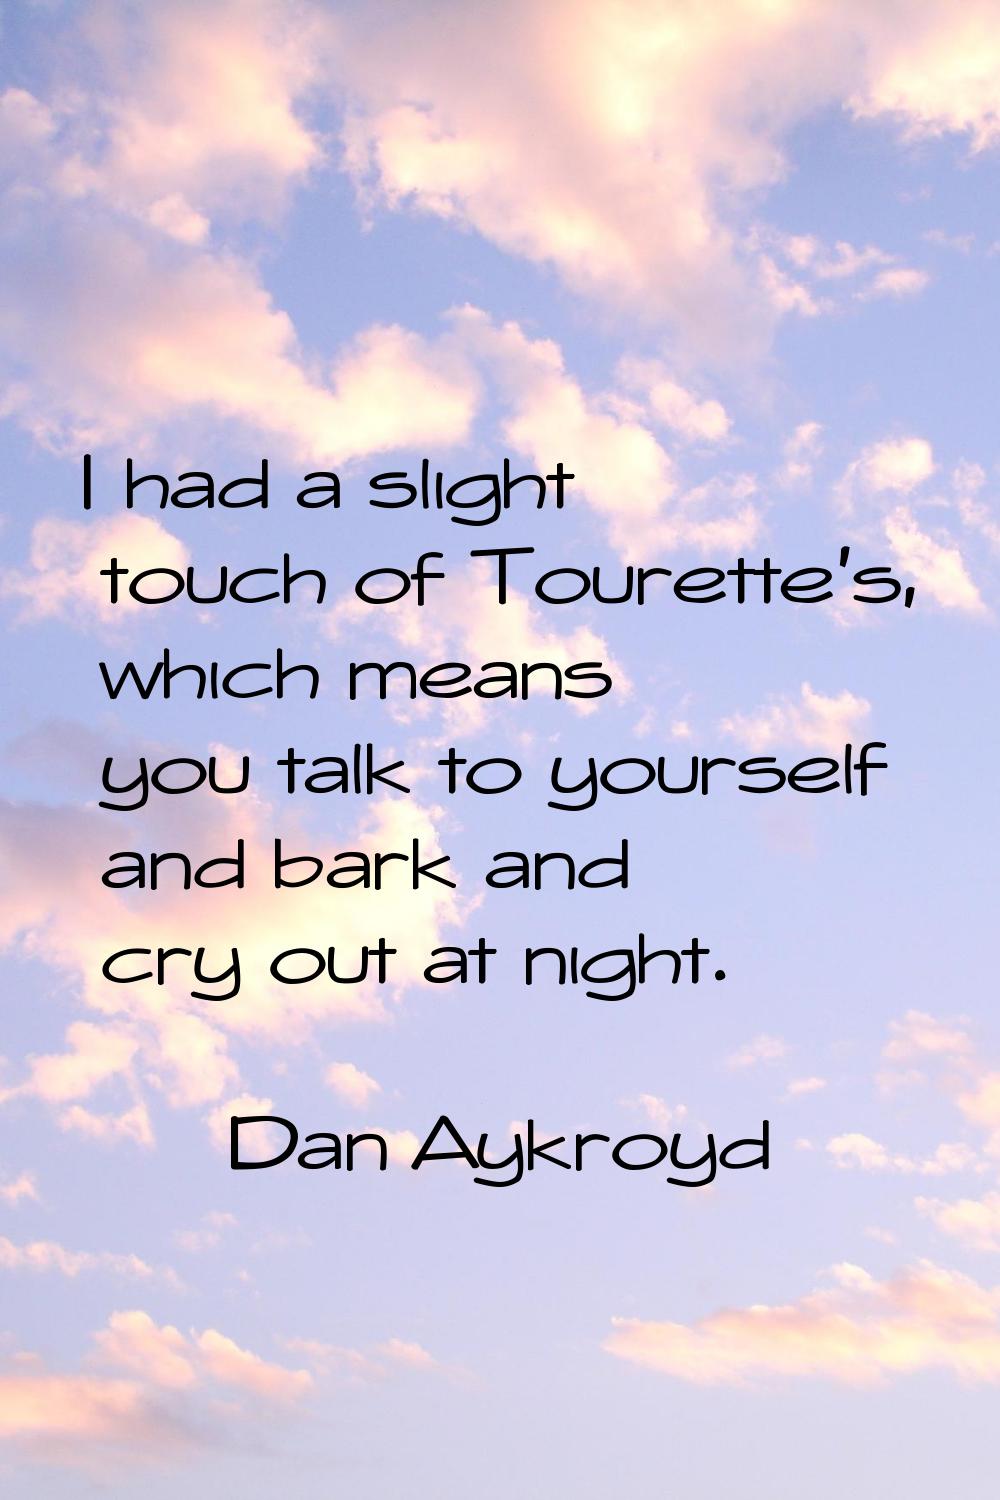 I had a slight touch of Tourette's, which means you talk to yourself and bark and cry out at night.